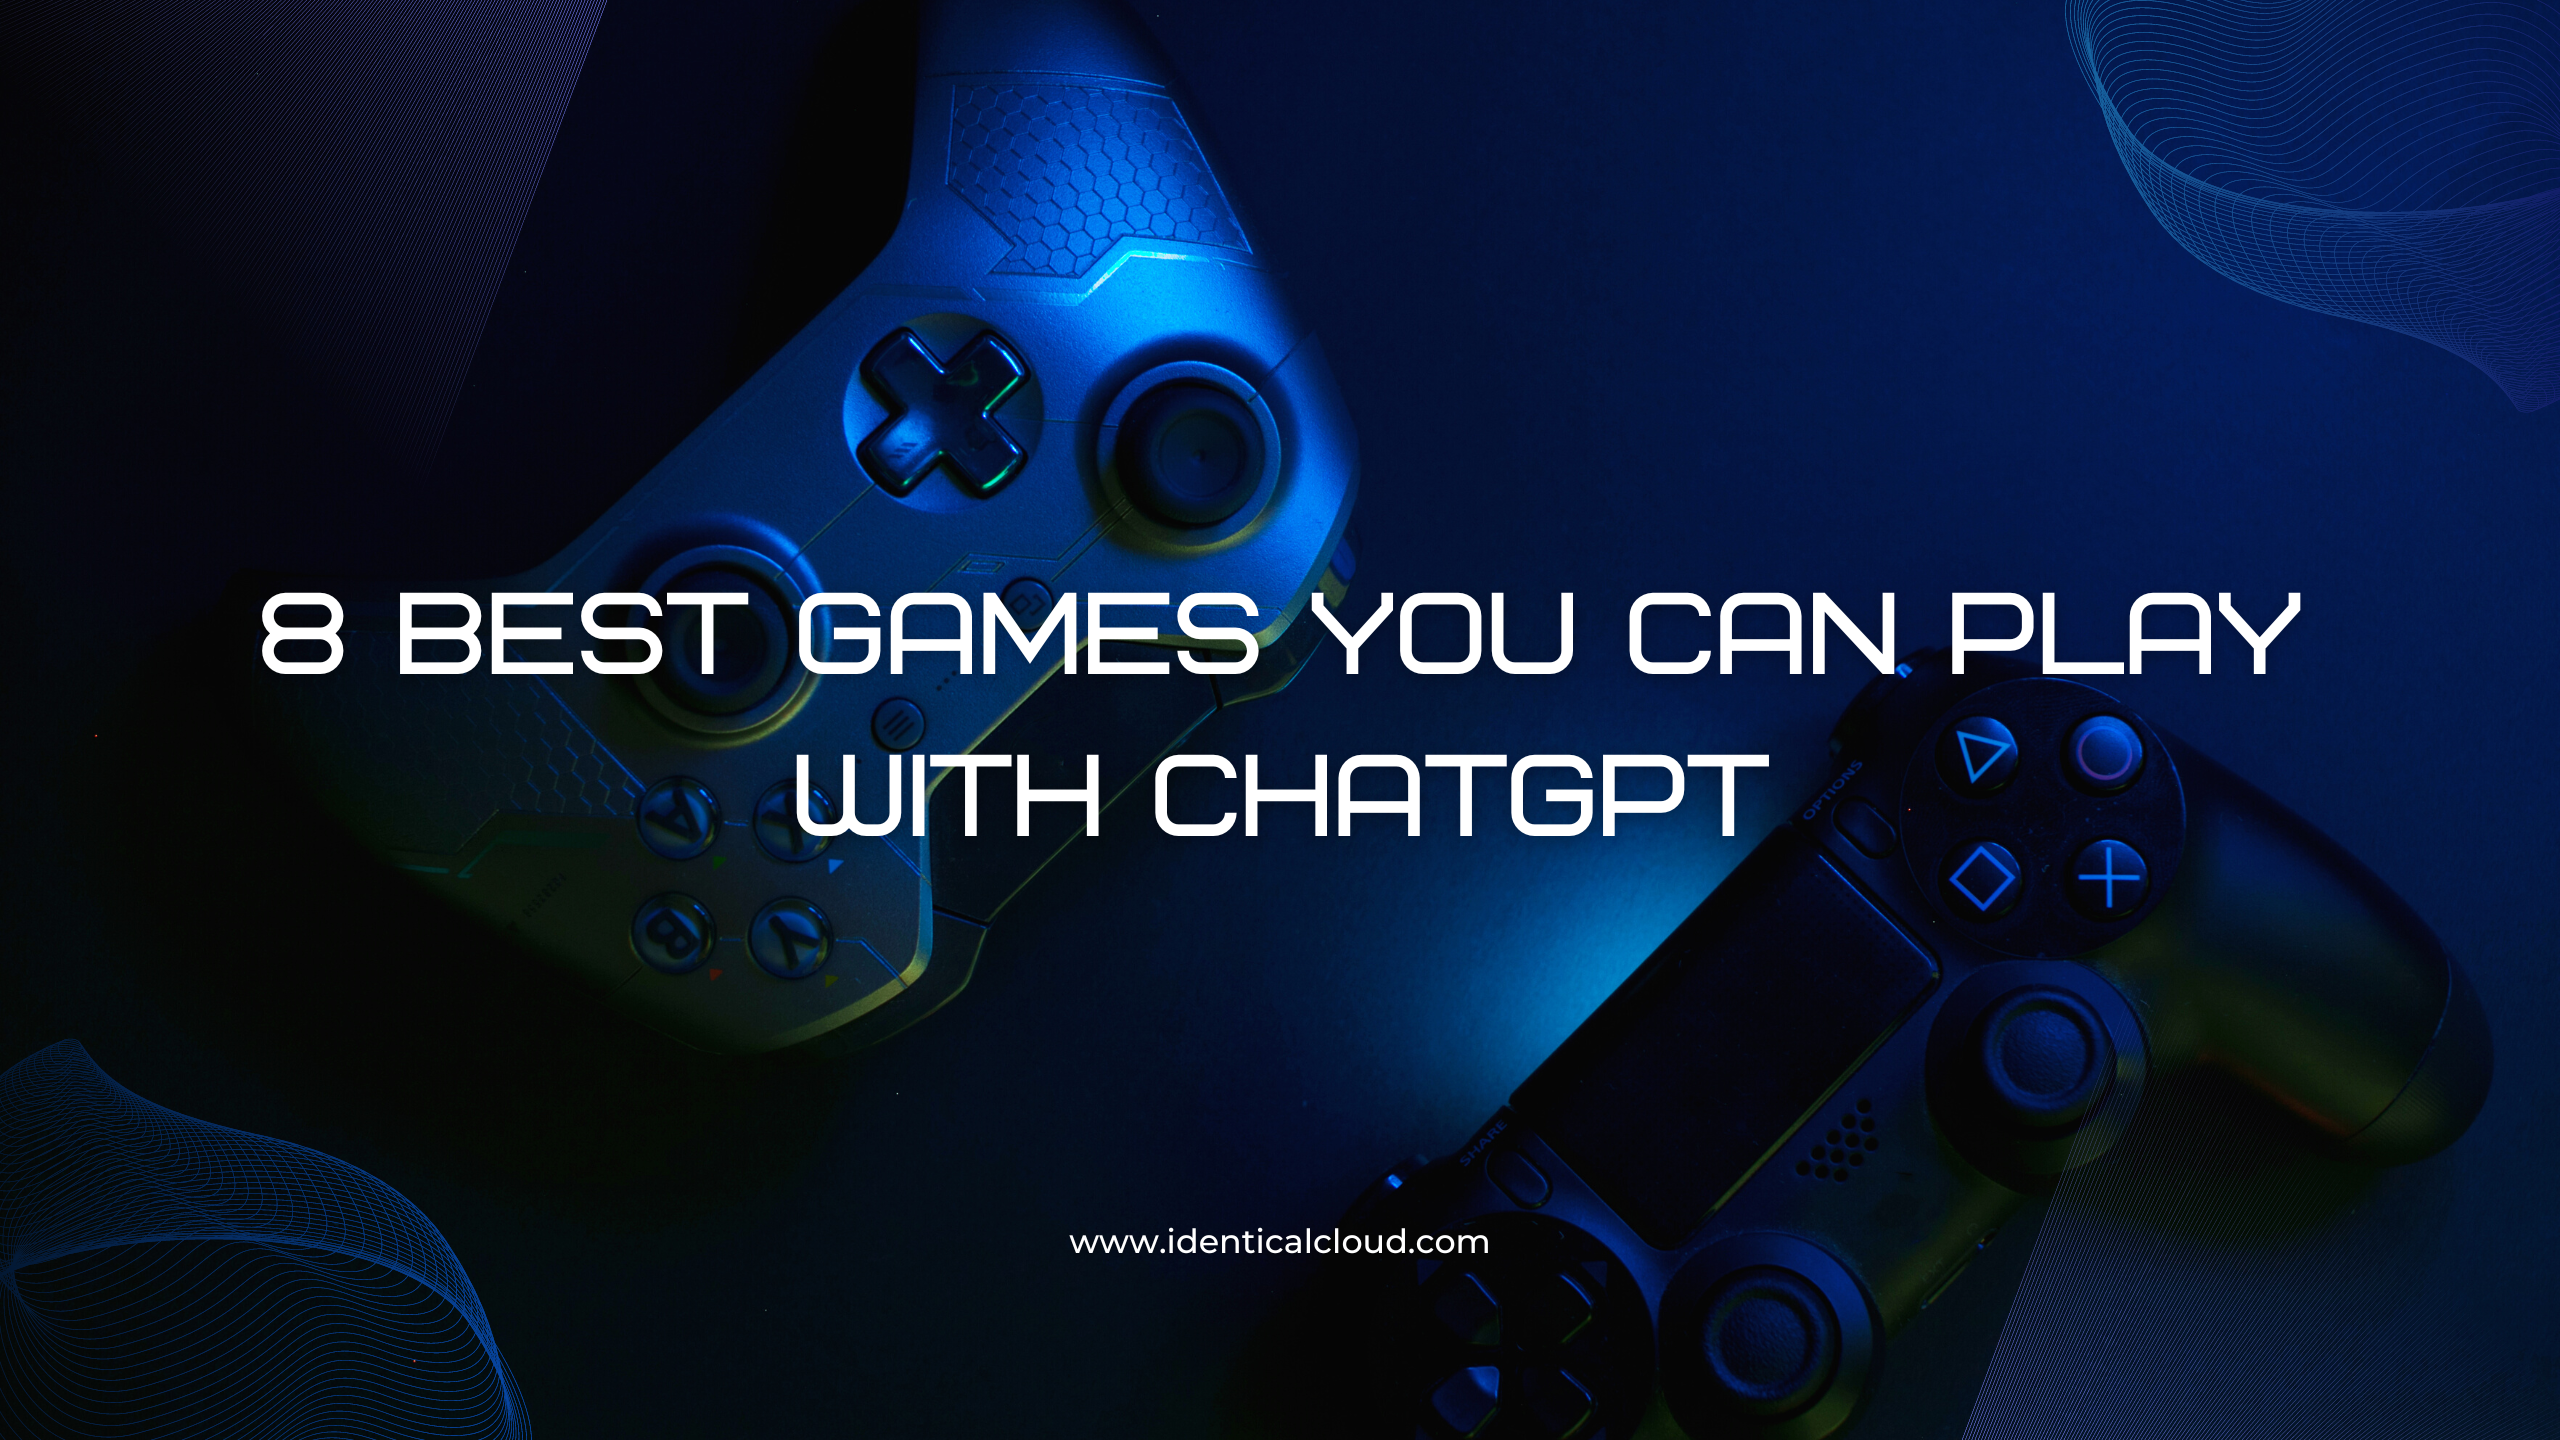 8 Best Games You Can Play with ChatGPT - Identicalcloud.com